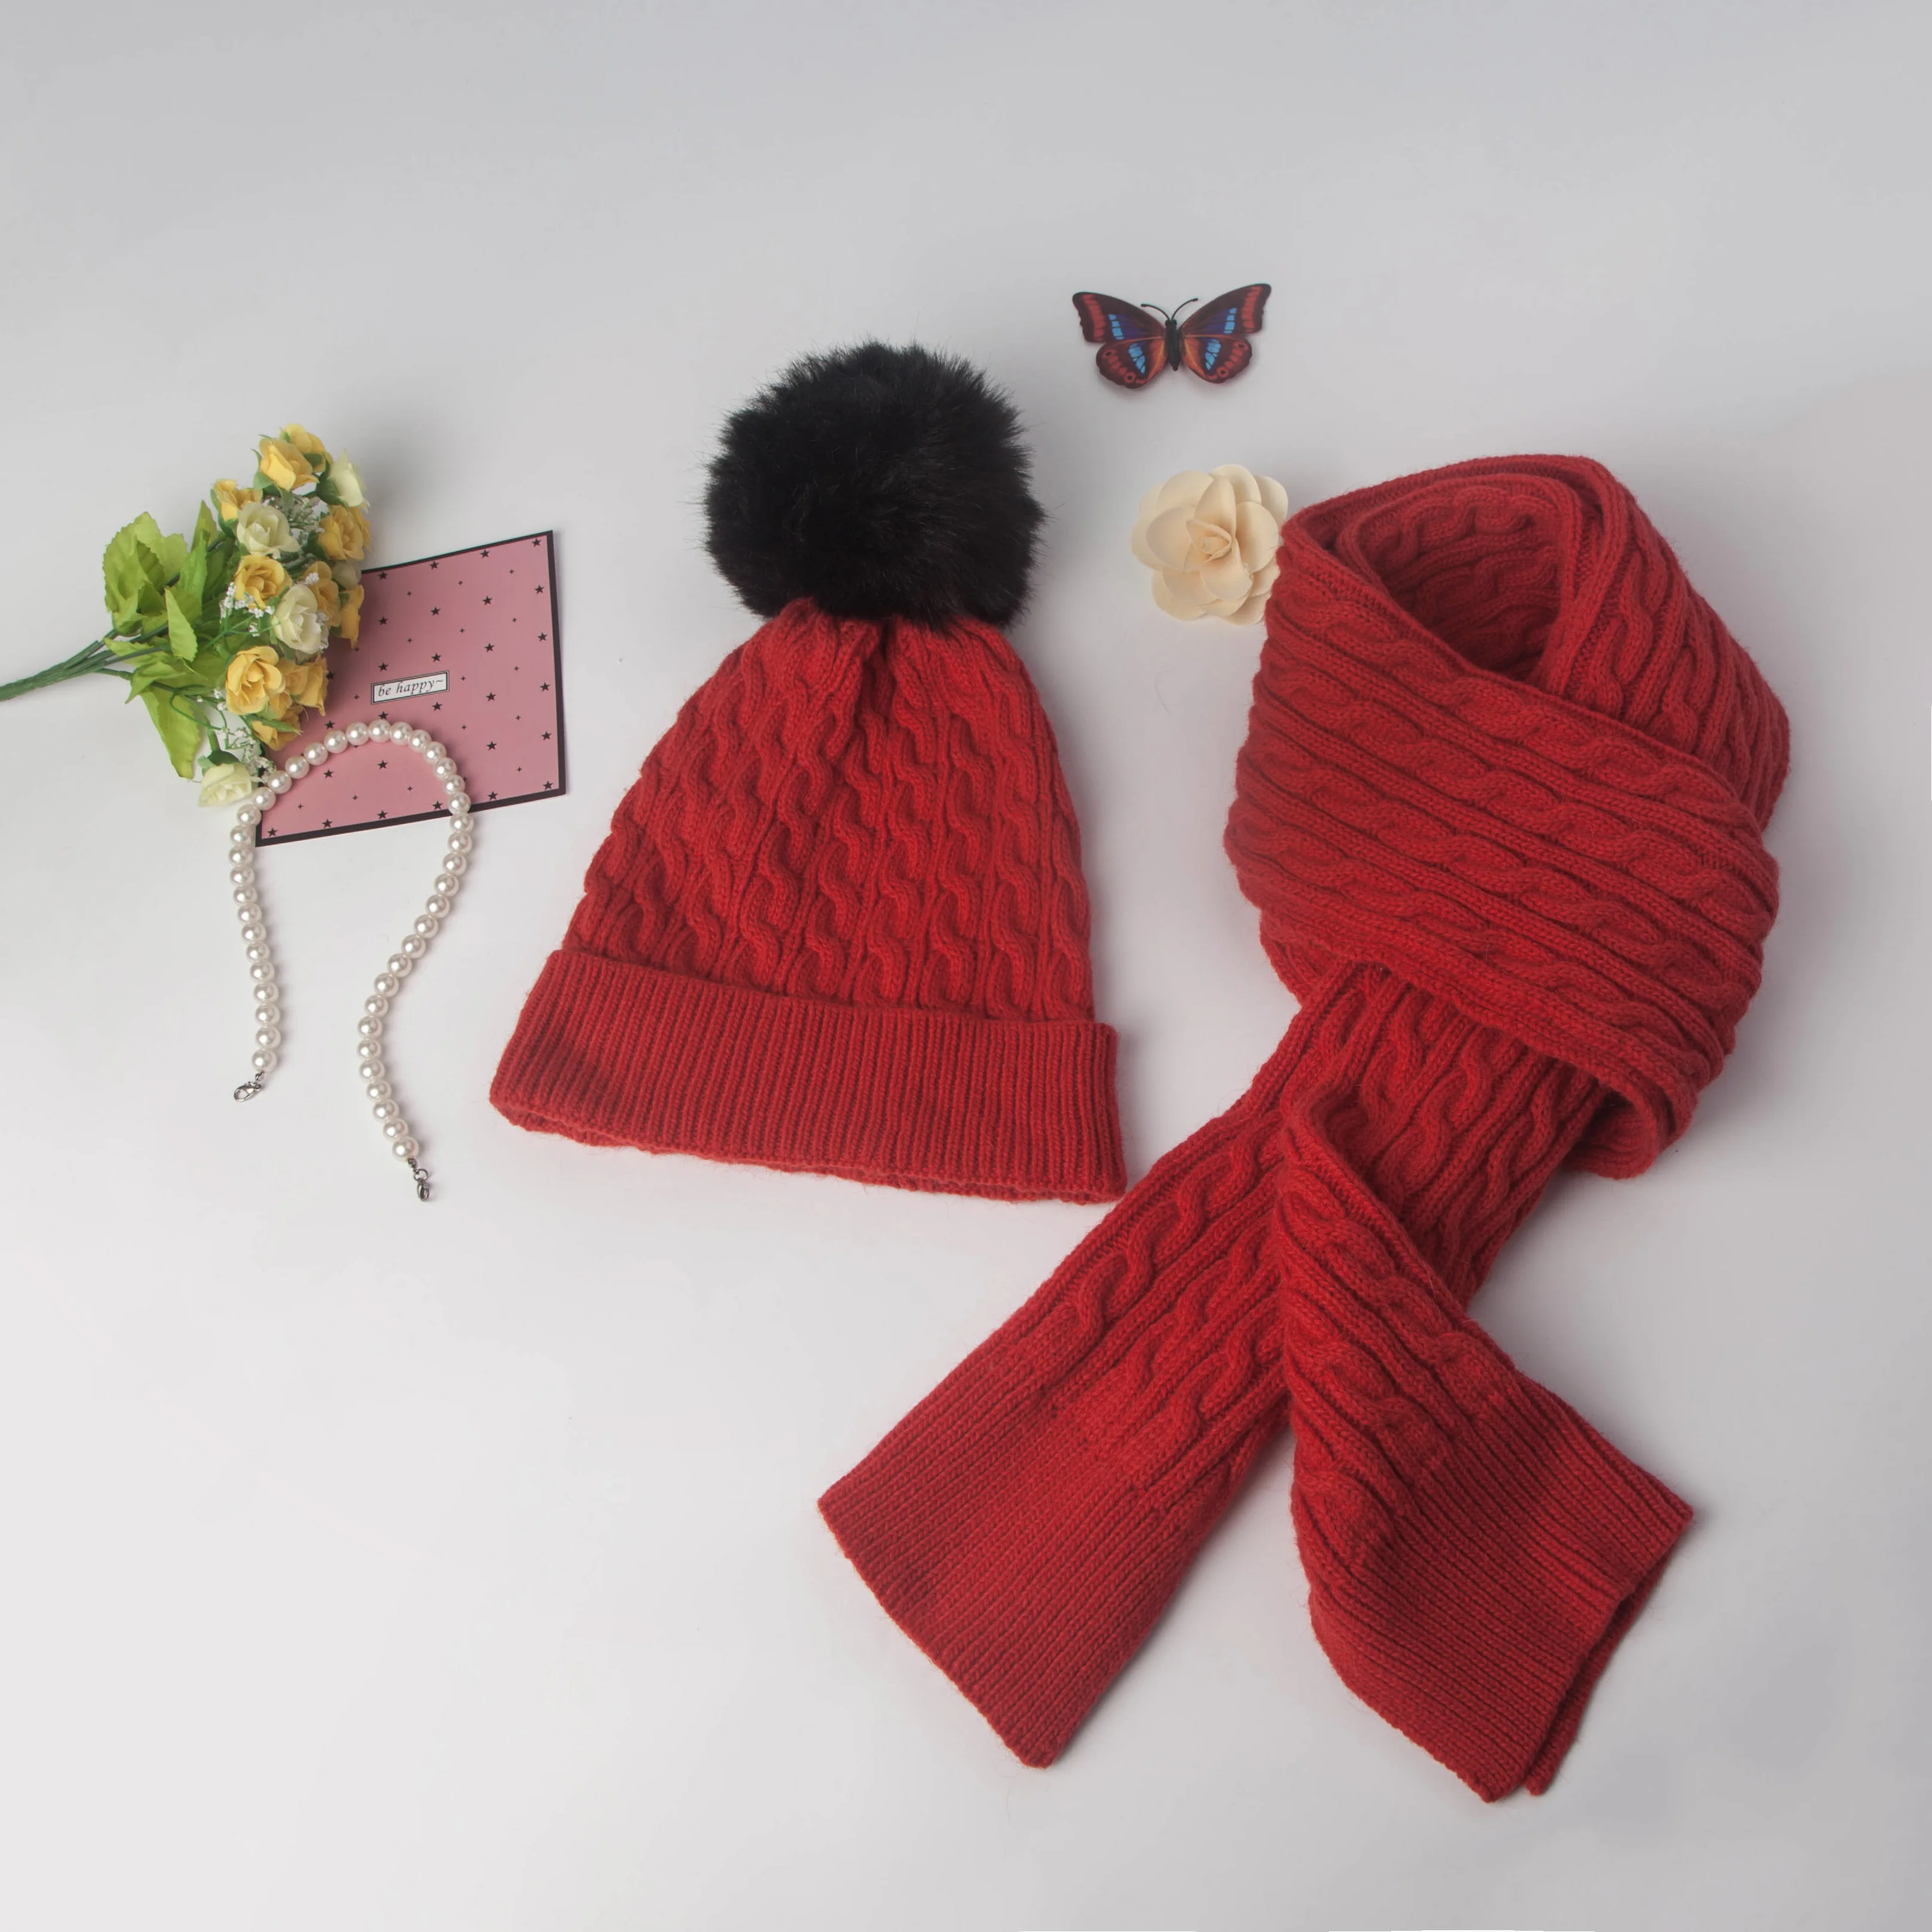 Hemp pattern big wool ball knitted hat scarf suit Ladies bright red festive knitted hat scarf Jacquard knitted hatand scarf suit